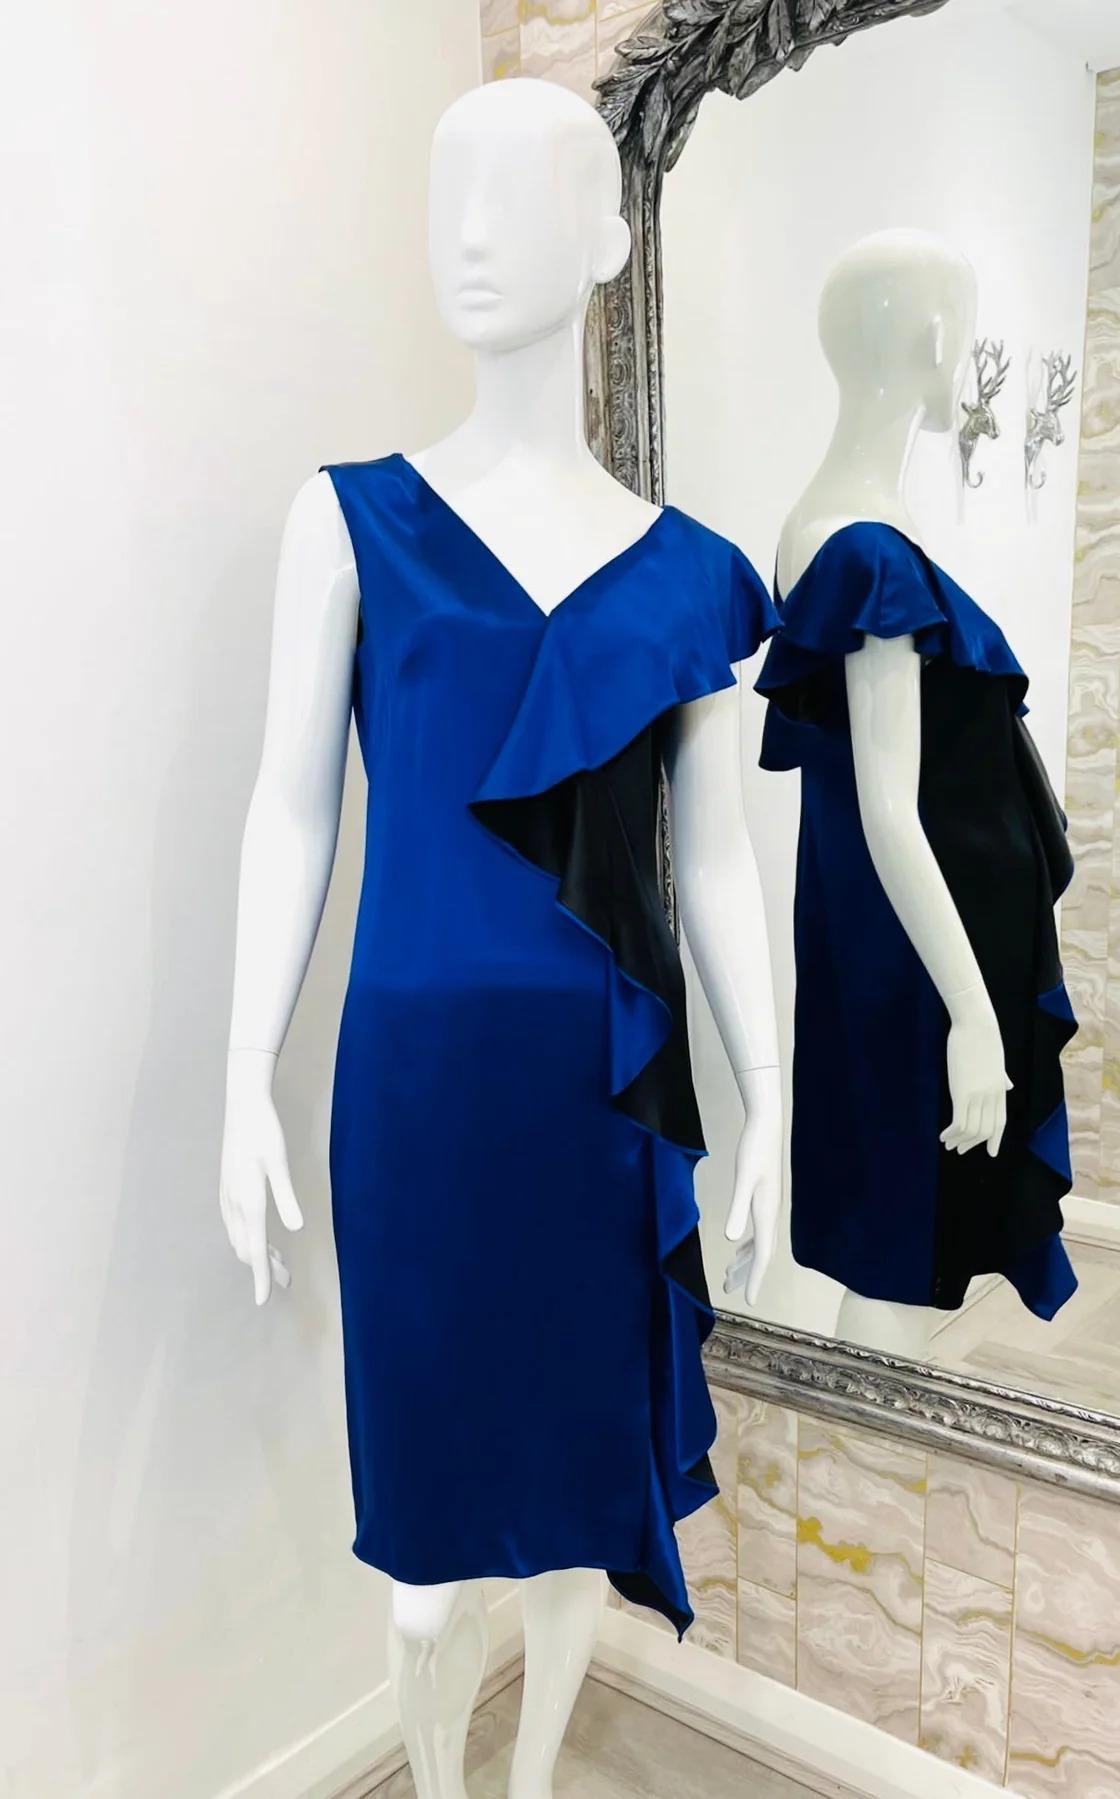 Diane Von Furstenberg Dress

Royal blue with contrasting navy blue, over sized feature waterfall ruffle.

Additional information:
Size – 8UK
Composition – 62% Viscose, 38% Acetate
Condition – Very Good